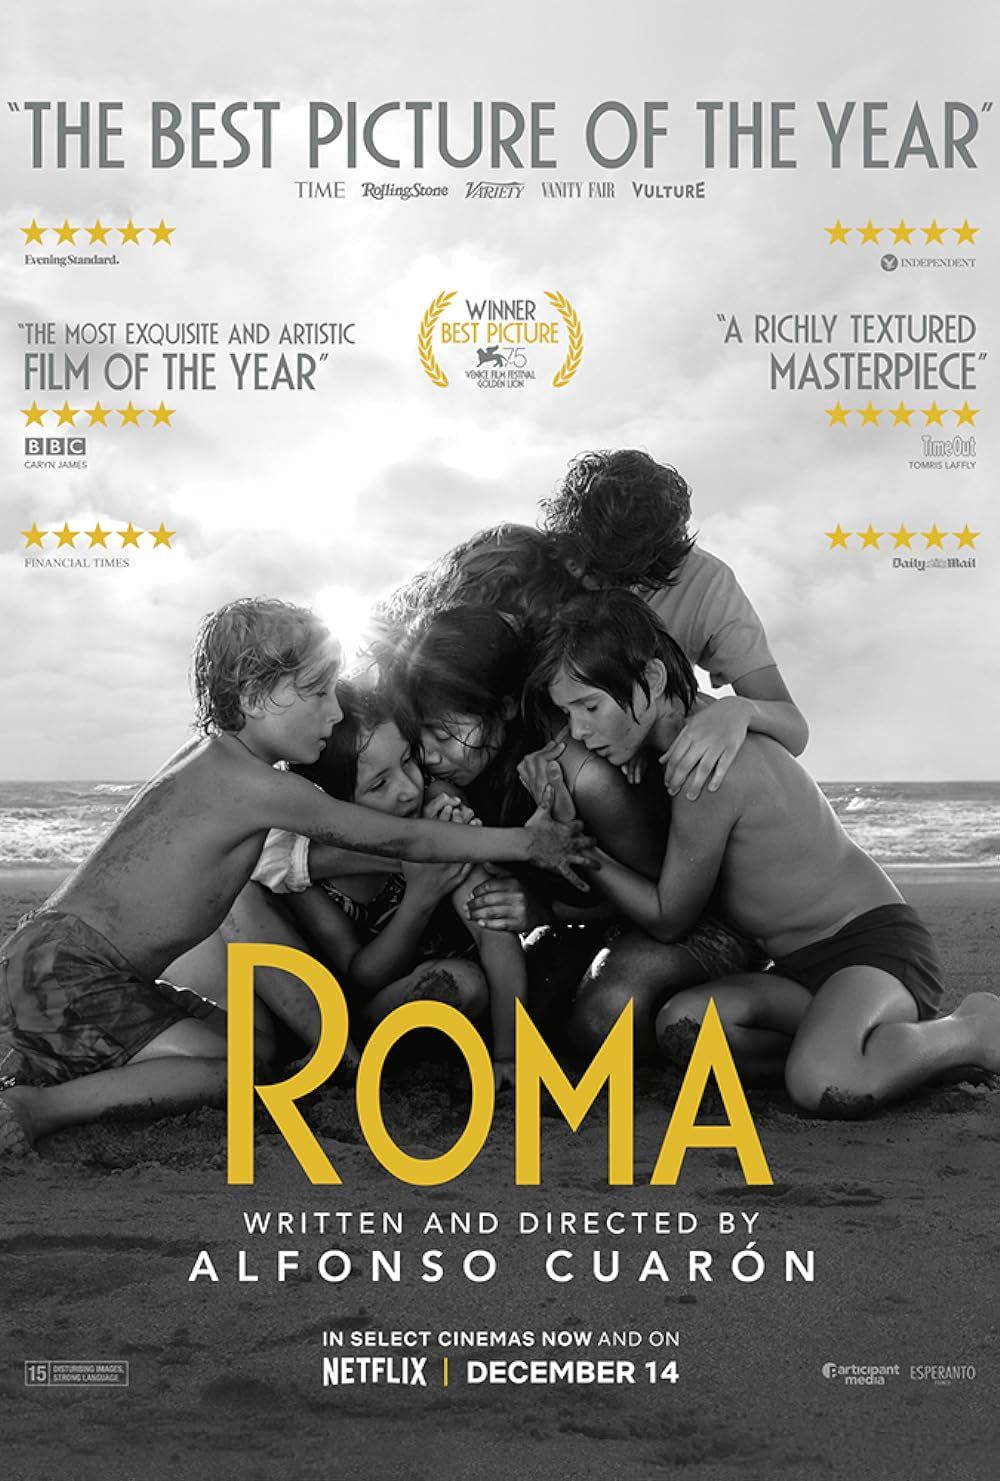 The Cast of Roma